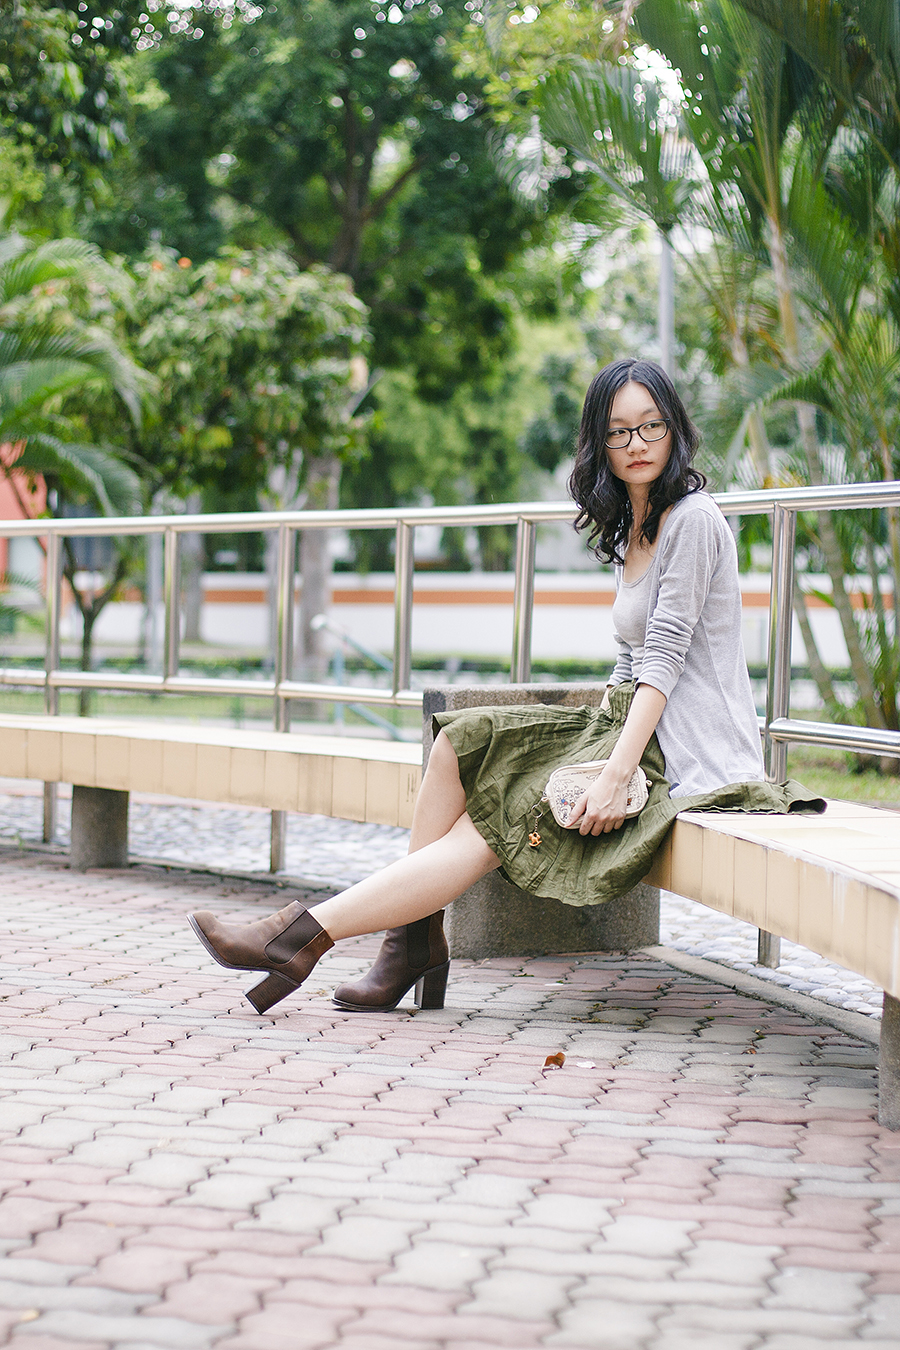 Outfit: EMart grey bratop, Bugis Street green skirt, Gap black frame glasses, Jeffrey Campbell Cash brown heel boots via Chictopia Shop, Happy Memorial Sky embroidered pouch from Takashimaya.